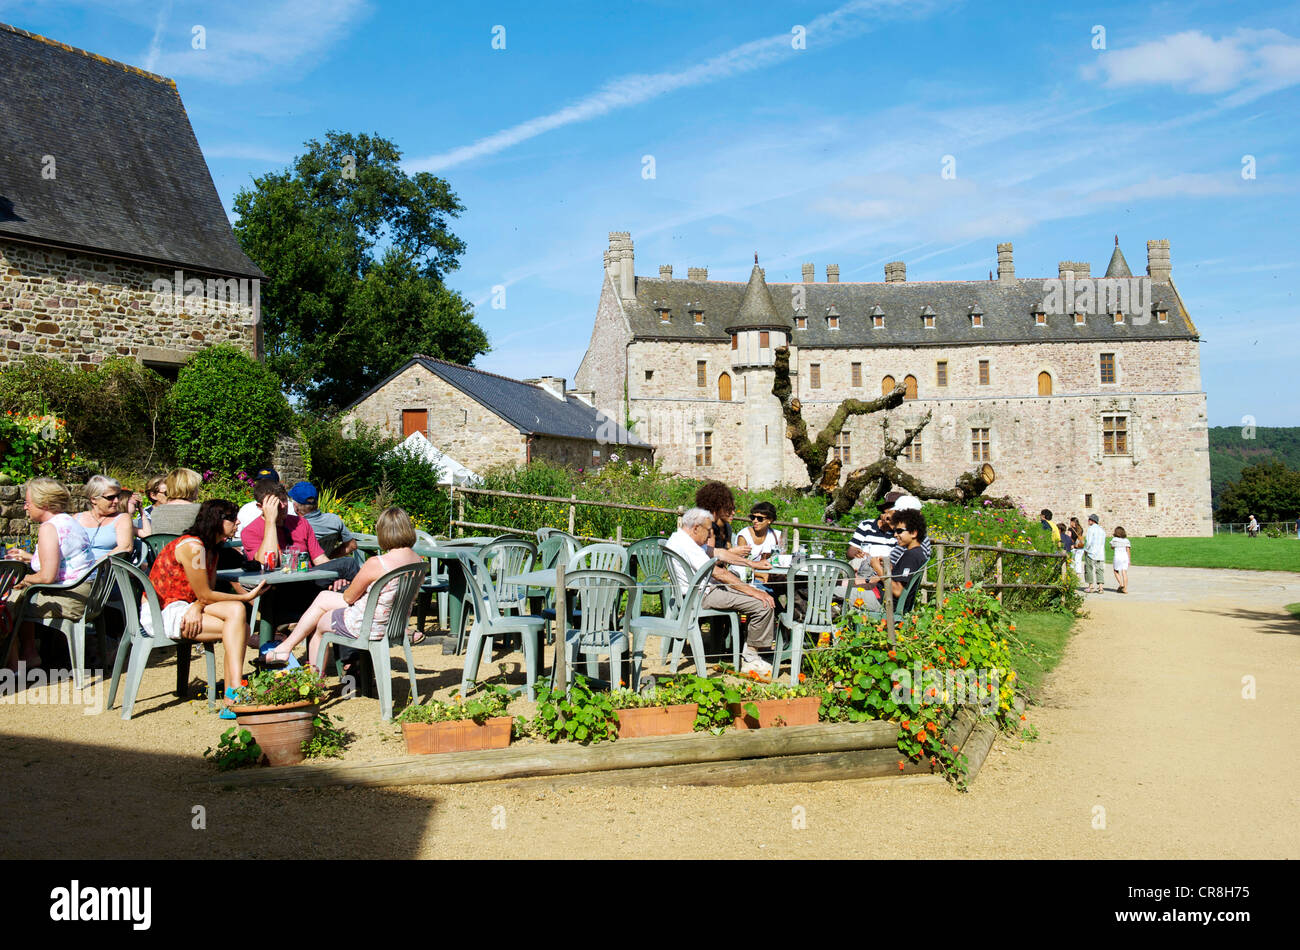 La Roche Restaurant High Resolution Stock Photography and Images - Alamy